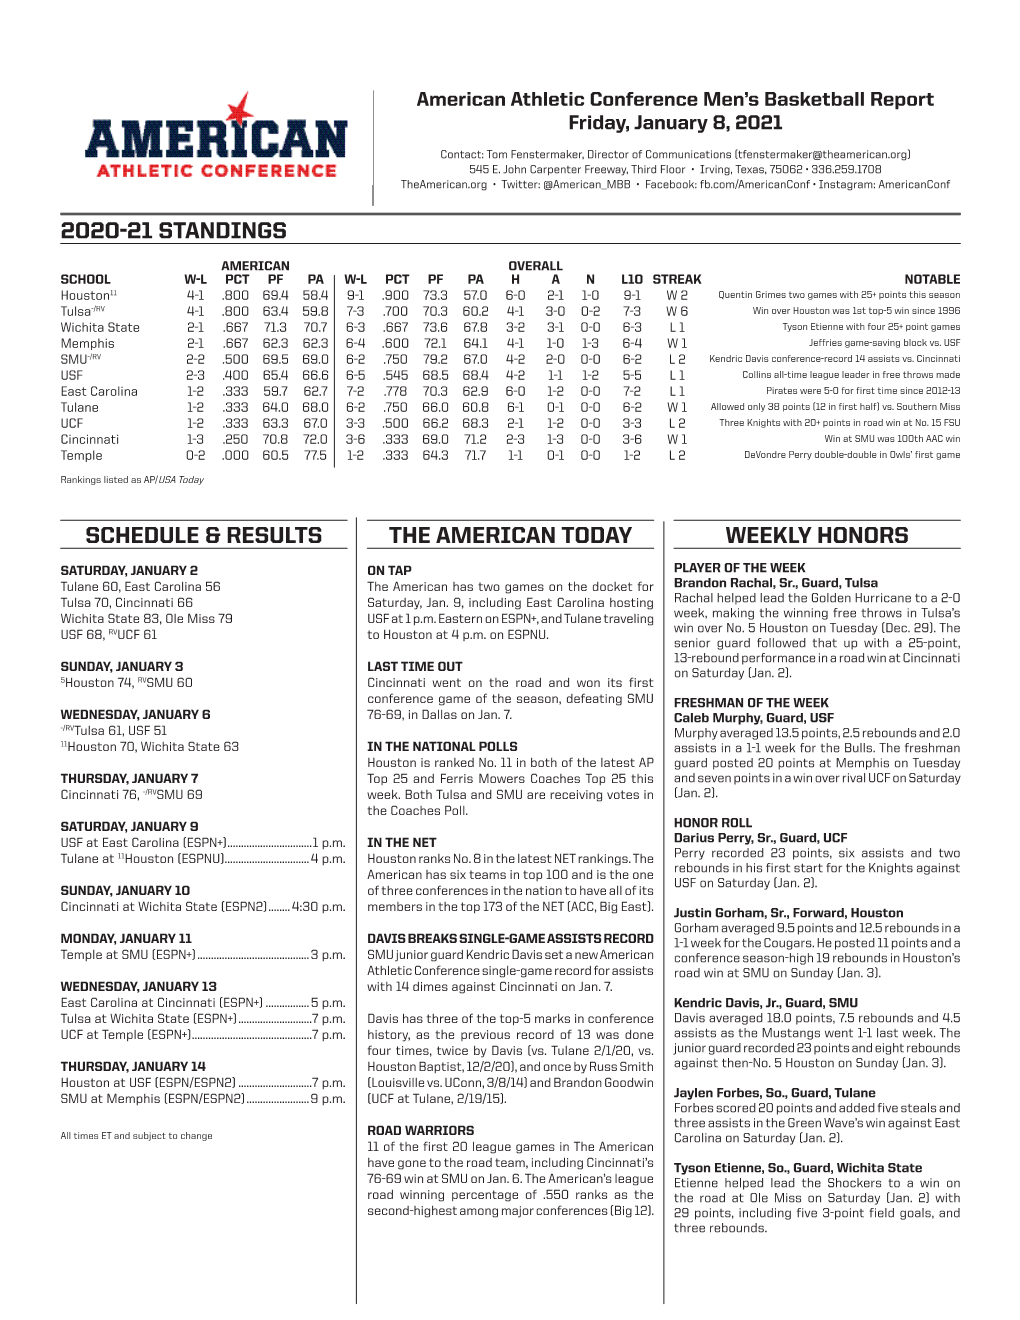 The American Today 2020-21 Standings Weekly Honors